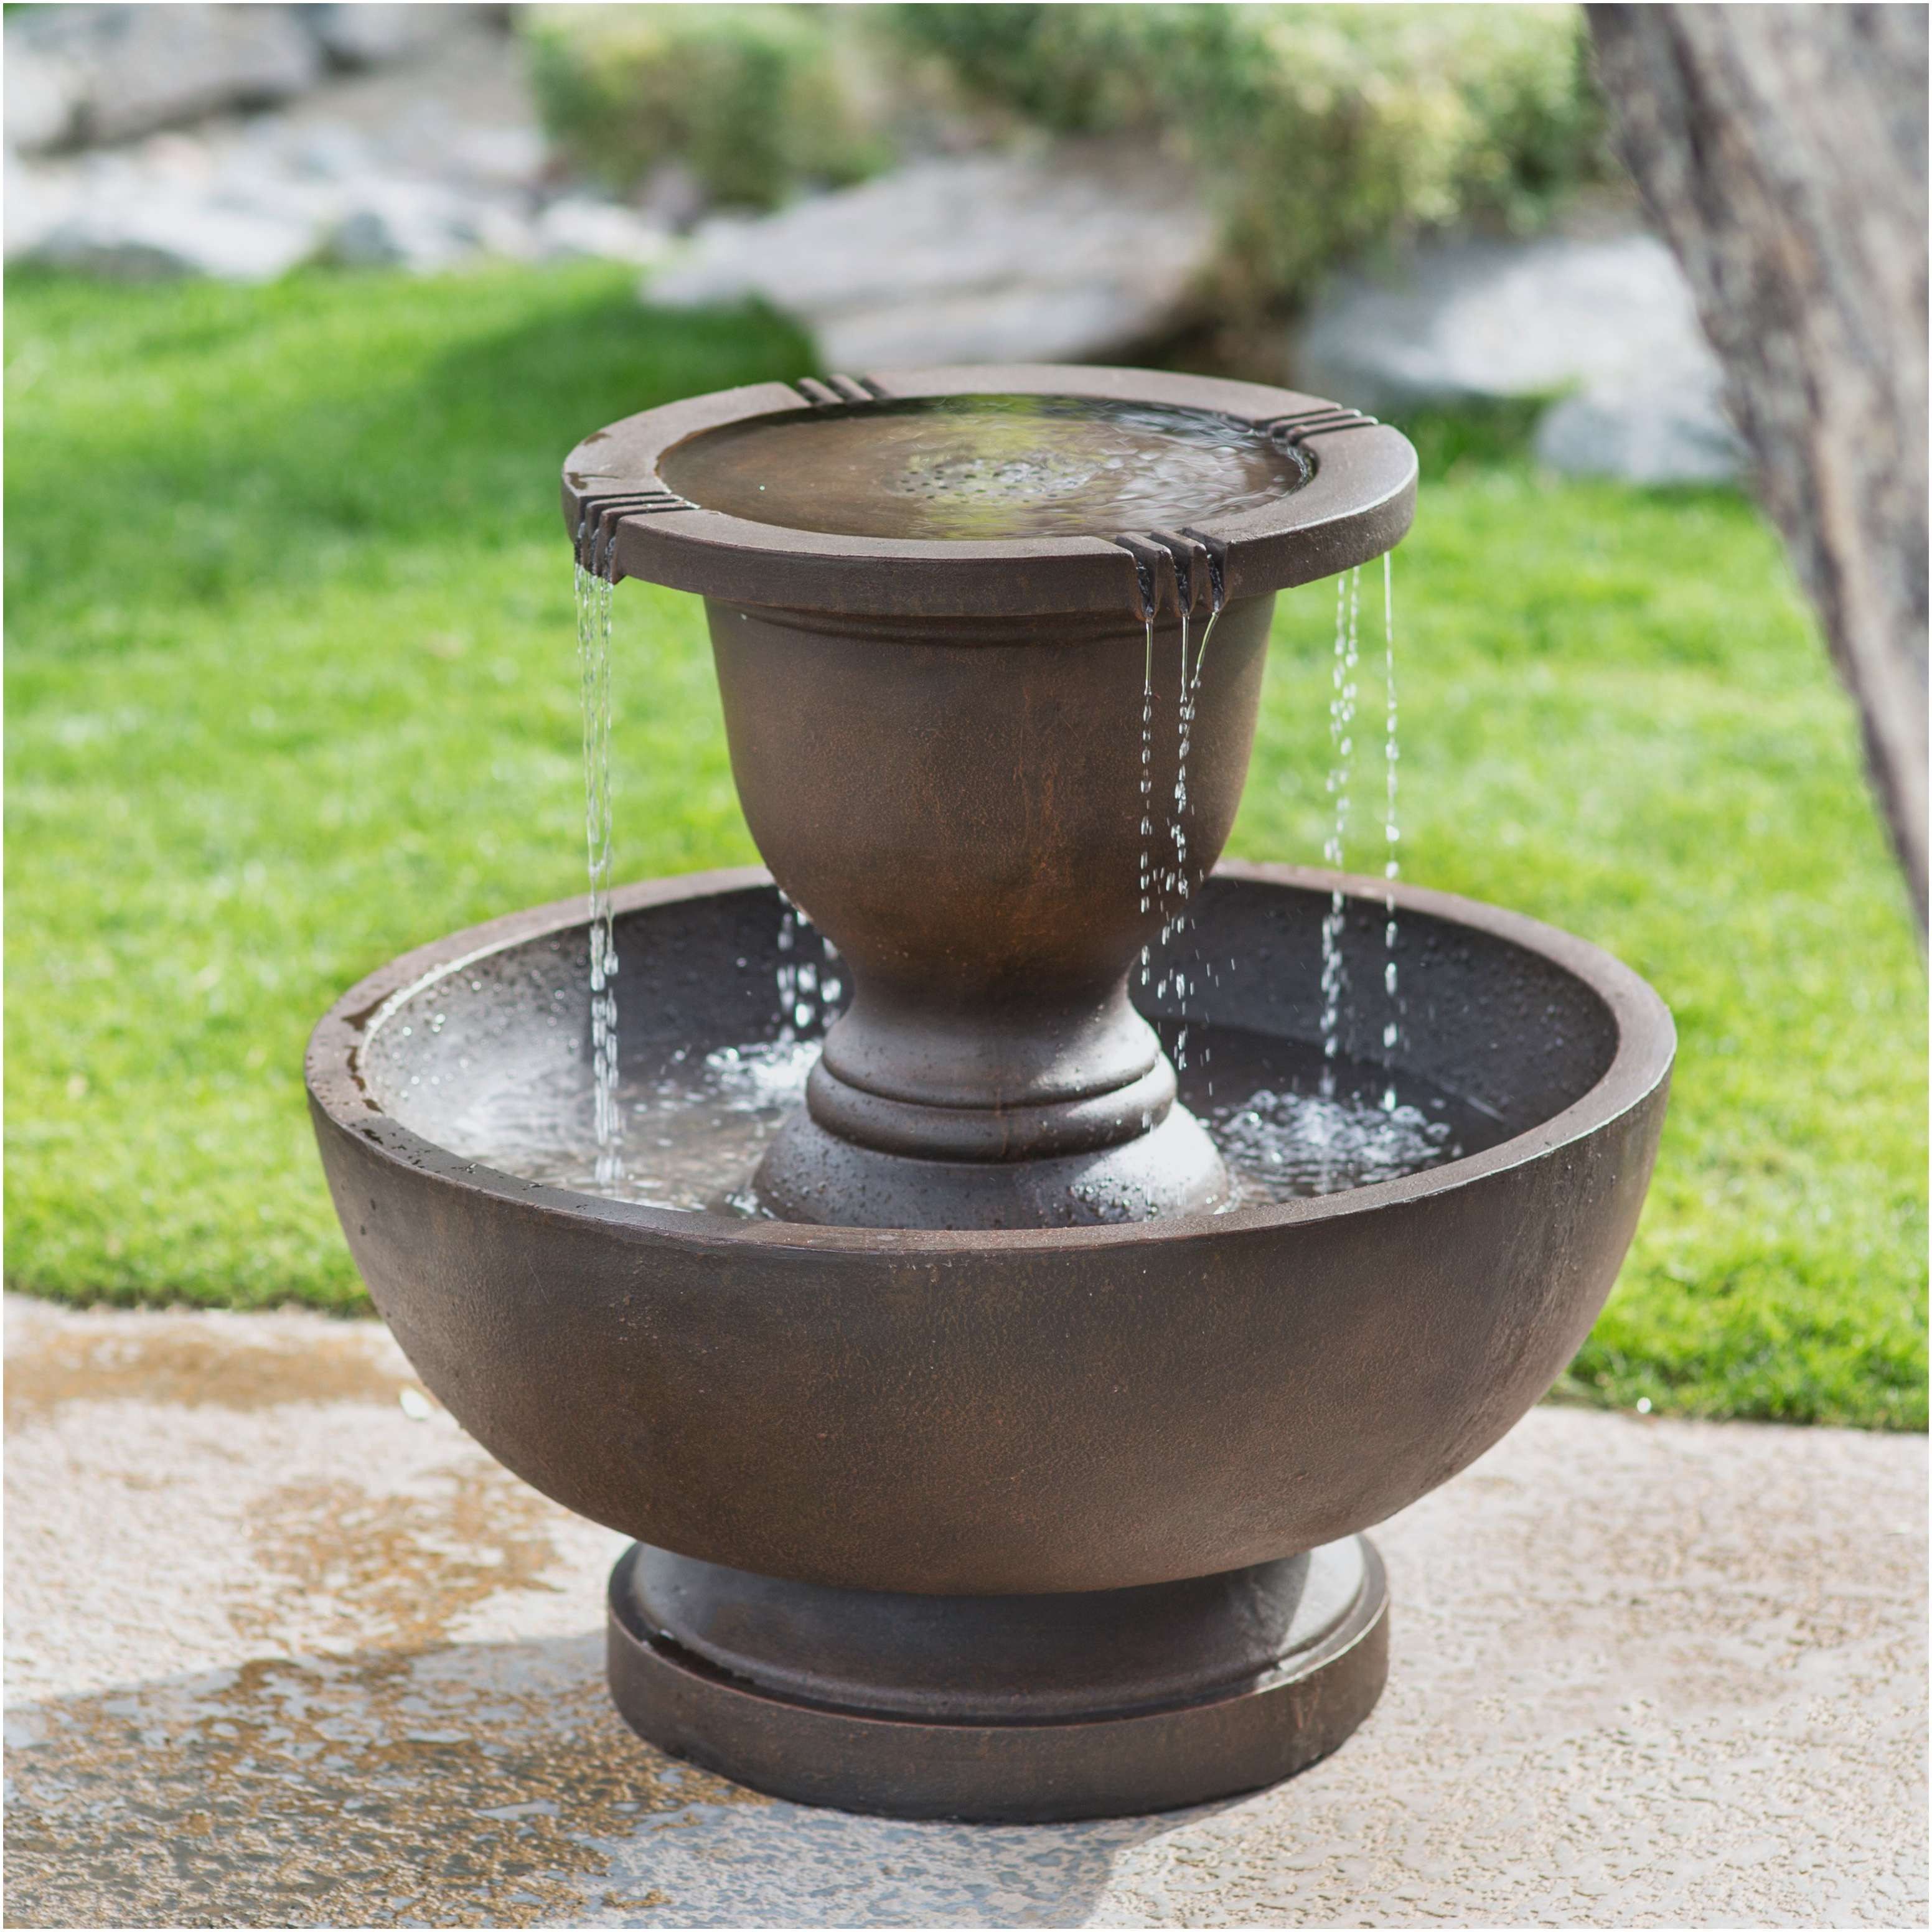 21 Popular Blue Vase Water Fountains Outdoor 2024 free download blue vase water fountains outdoor of ebay outdoor garden decorations the right choice mind blowing garden pertaining to ebay outdoor garden decorations finding a clever garden water fountain